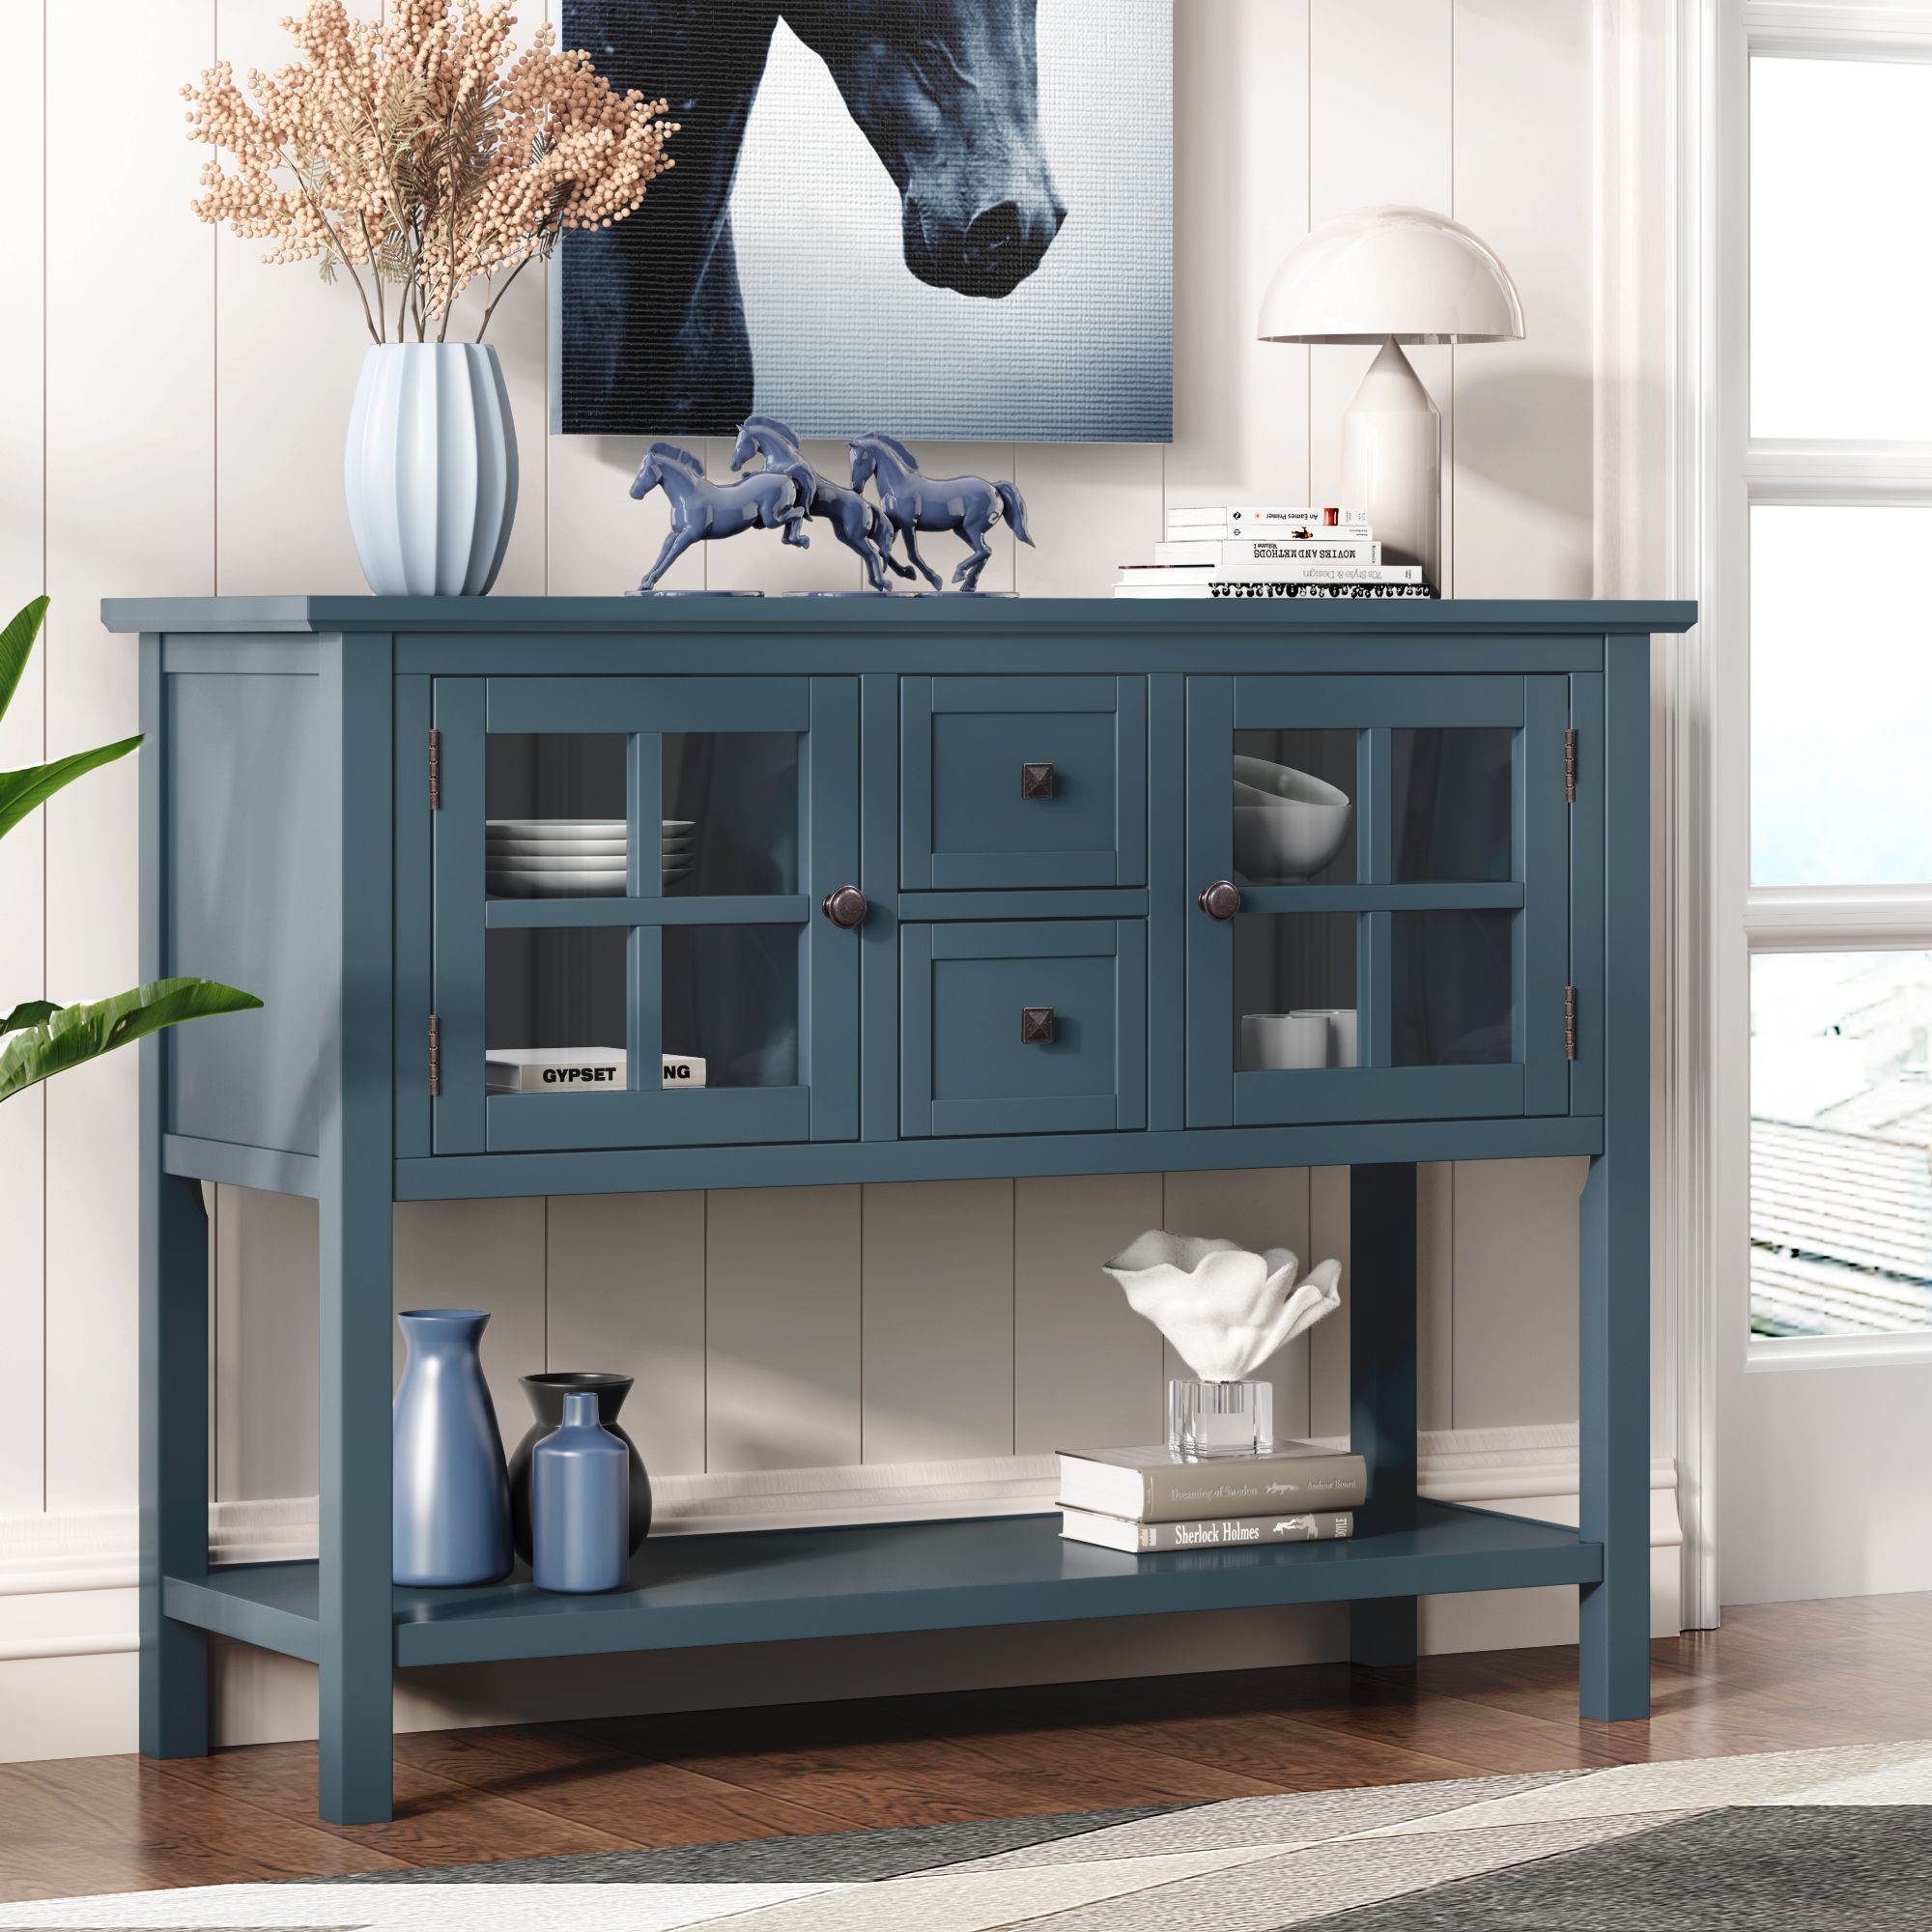 36 Retro Style Pine Console Table with 4 Drawers and 1 Storage Shelf, Blue  - ModernLuxe